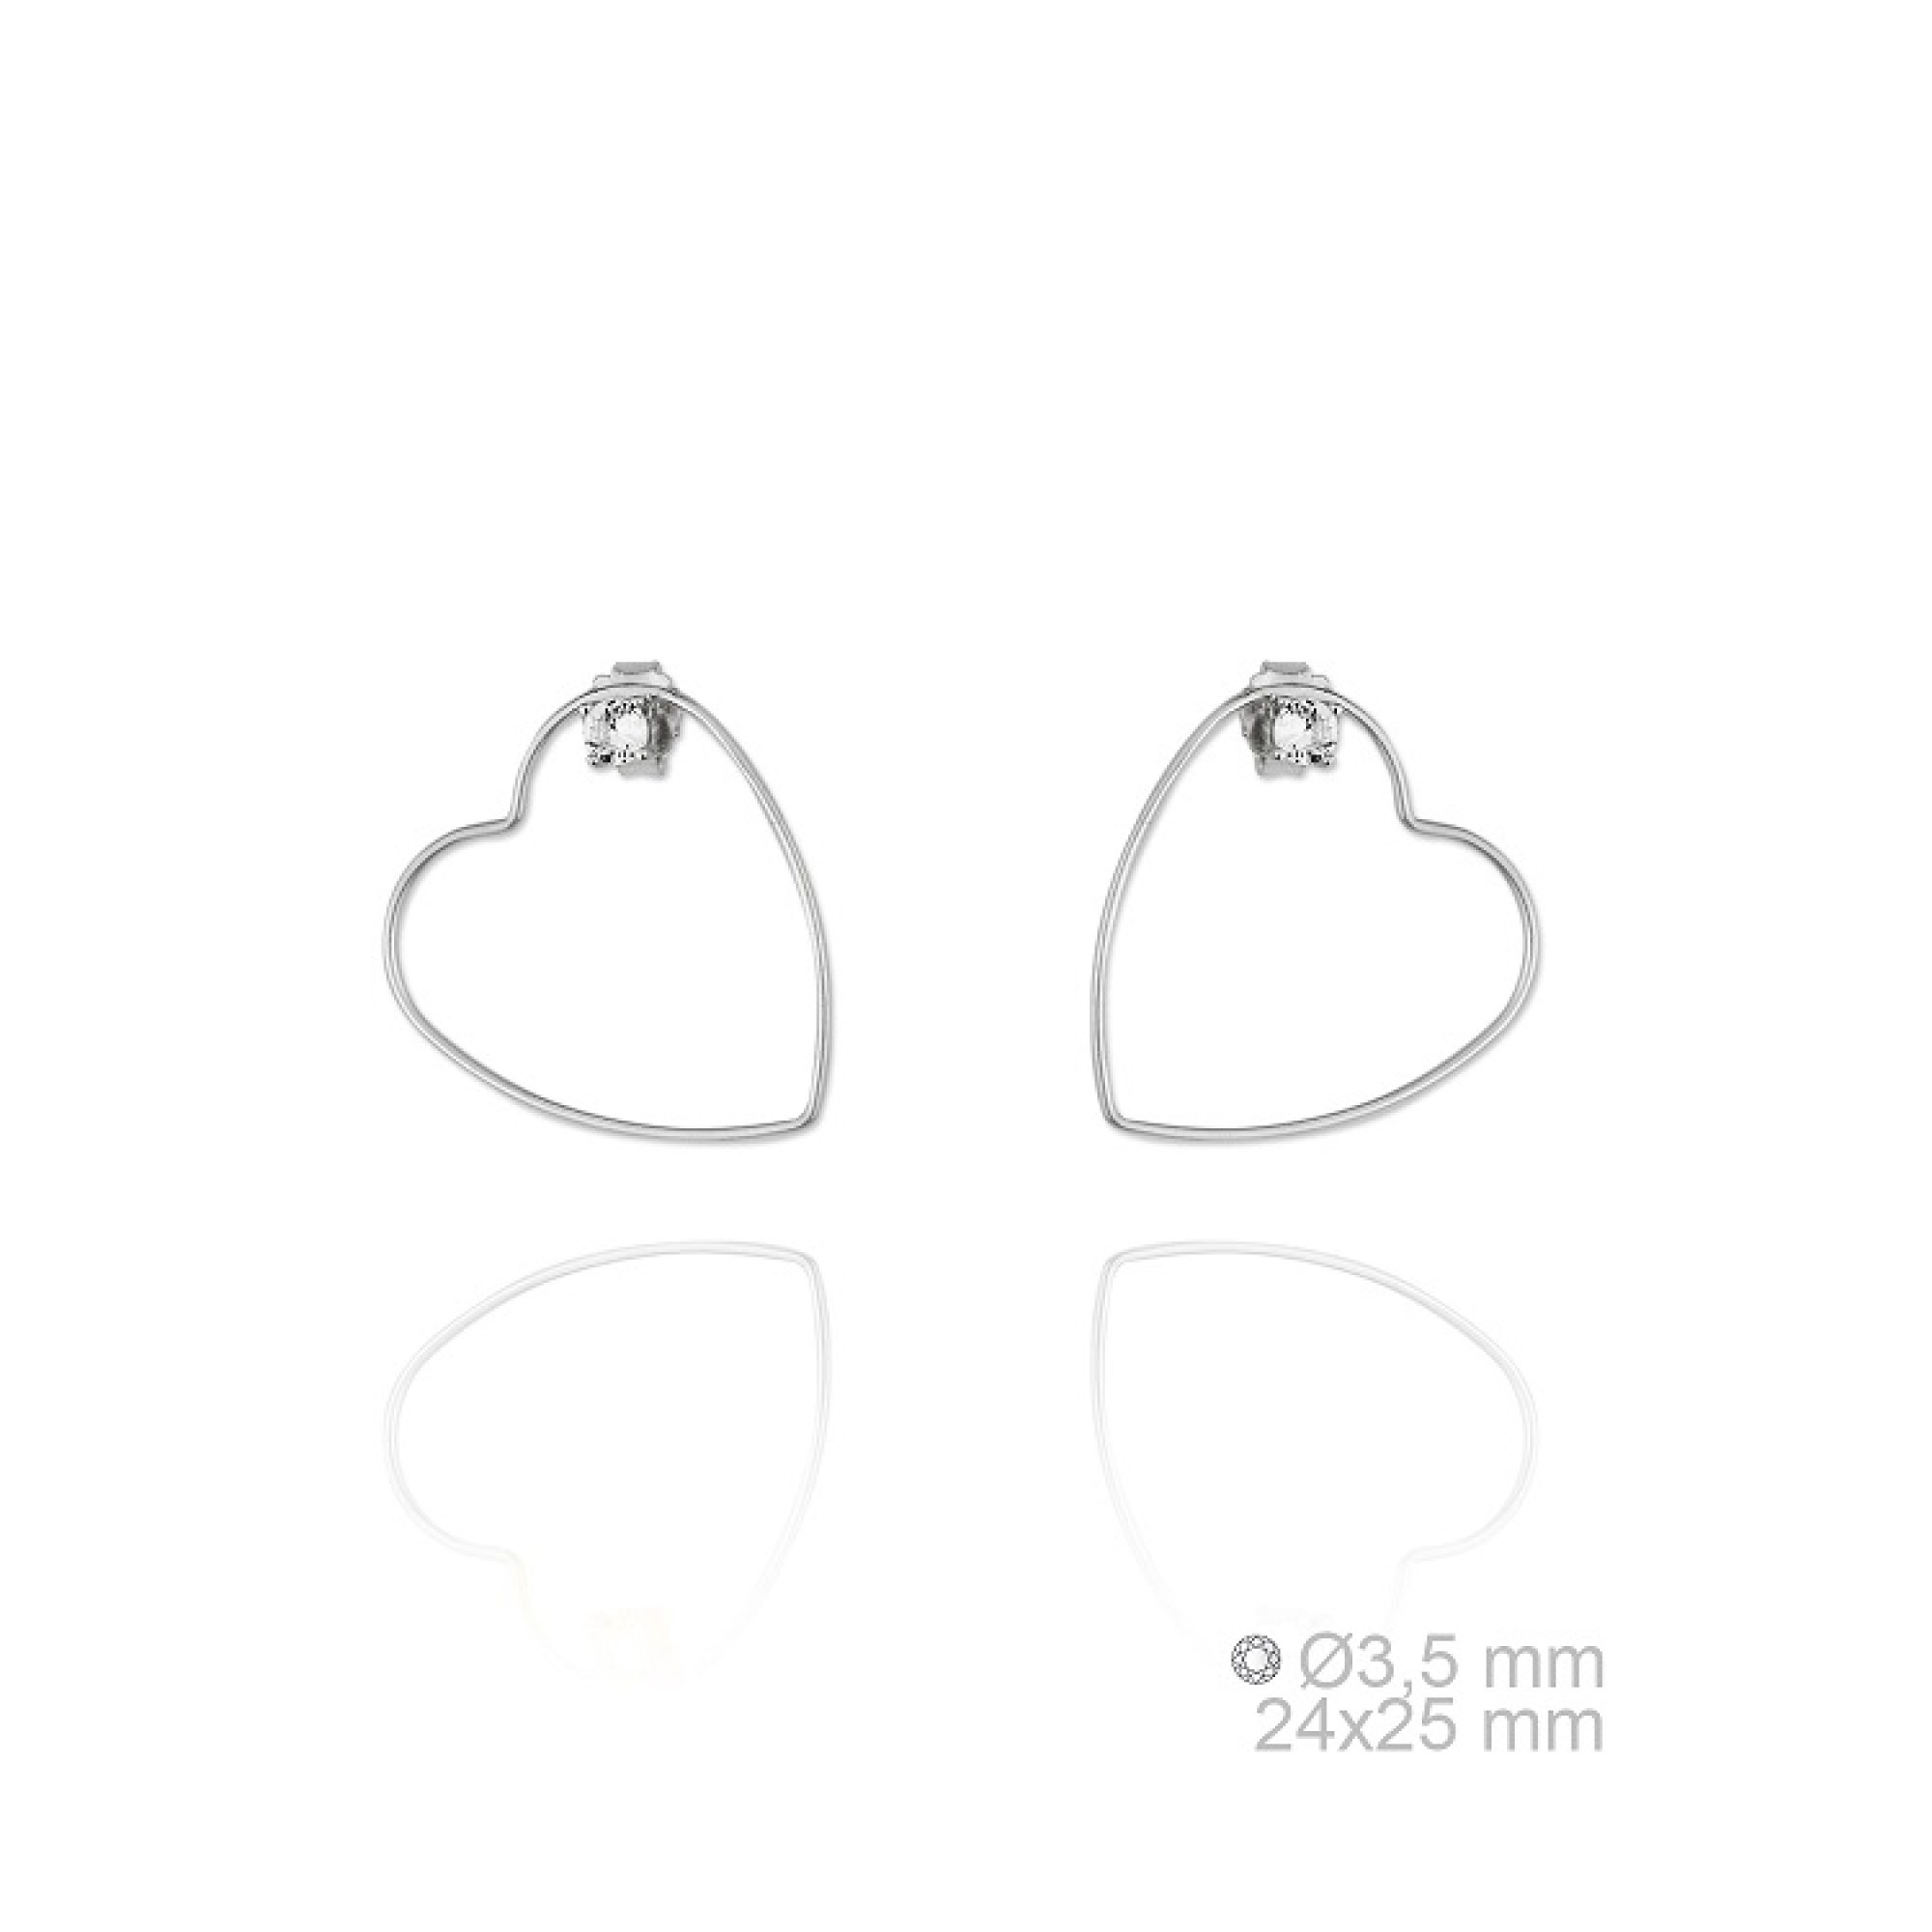 Silver heart shaped hoops with a zircon stone